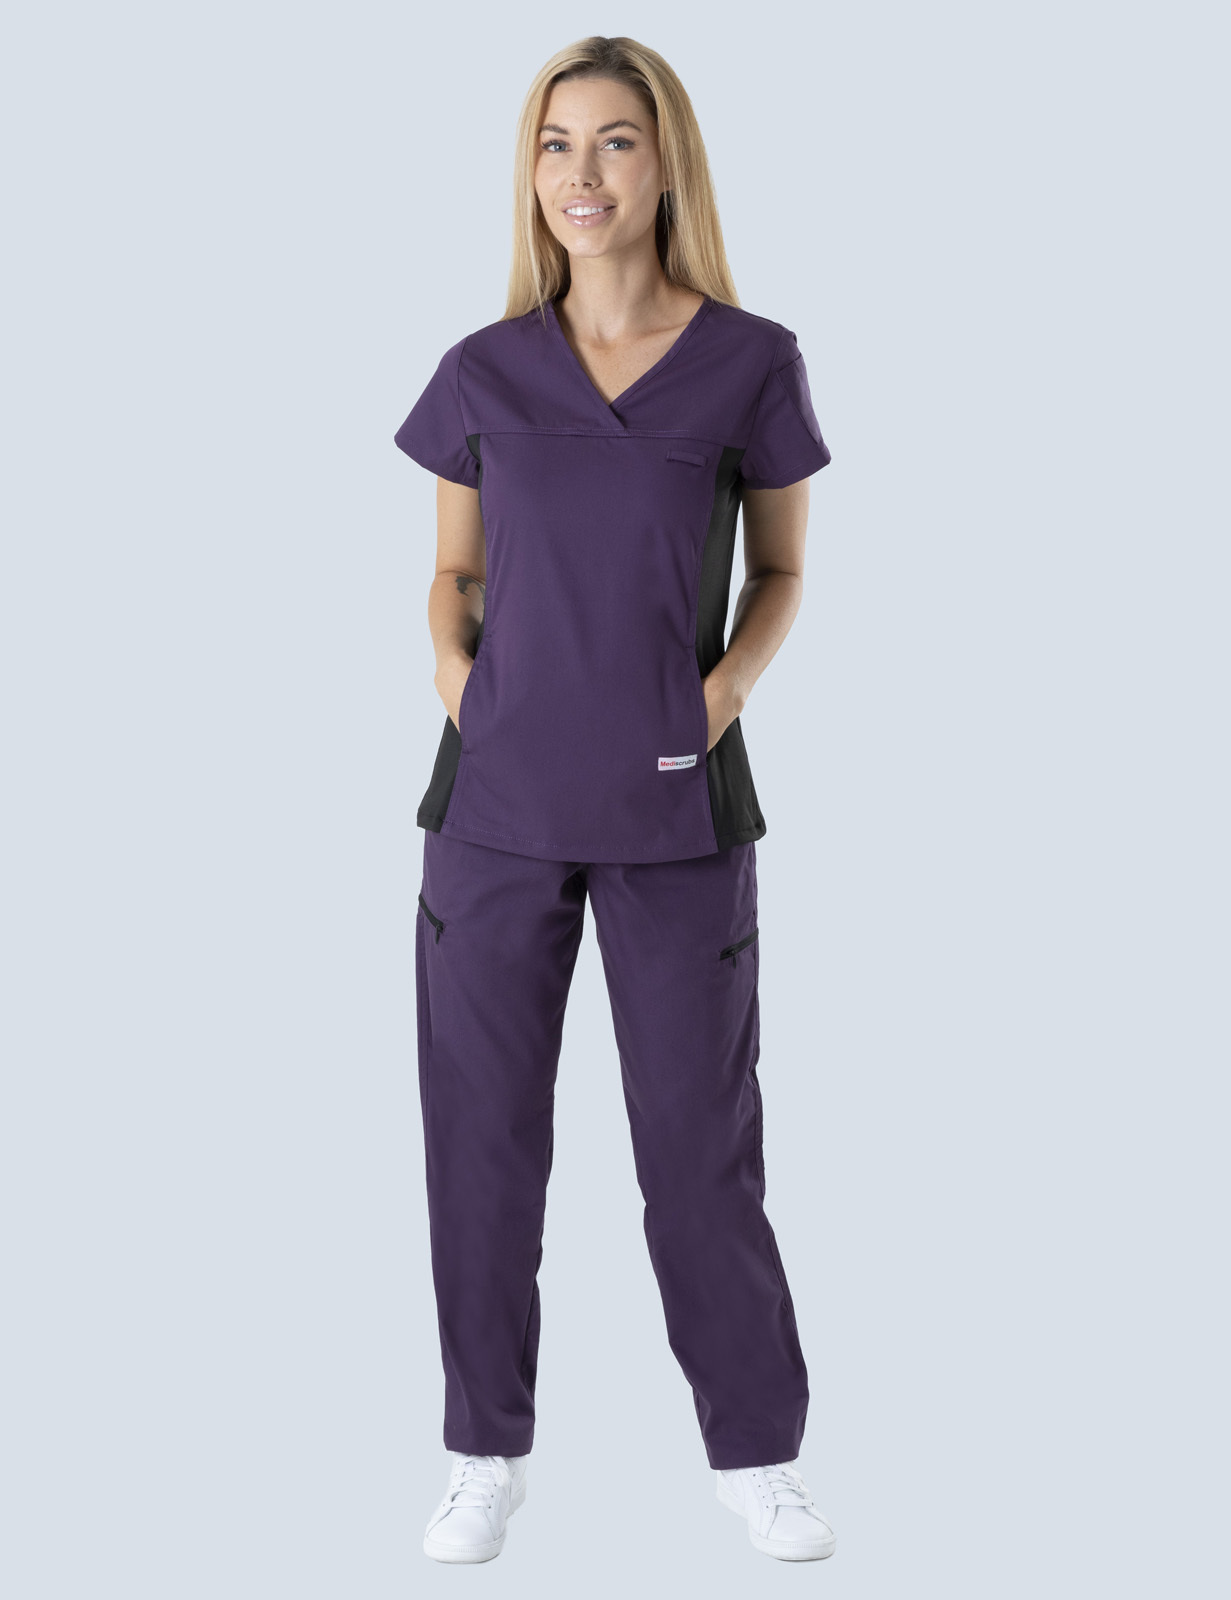 Women's Fit Solid Scrub Top With Spandex Panel - Aubergine - 2X Large